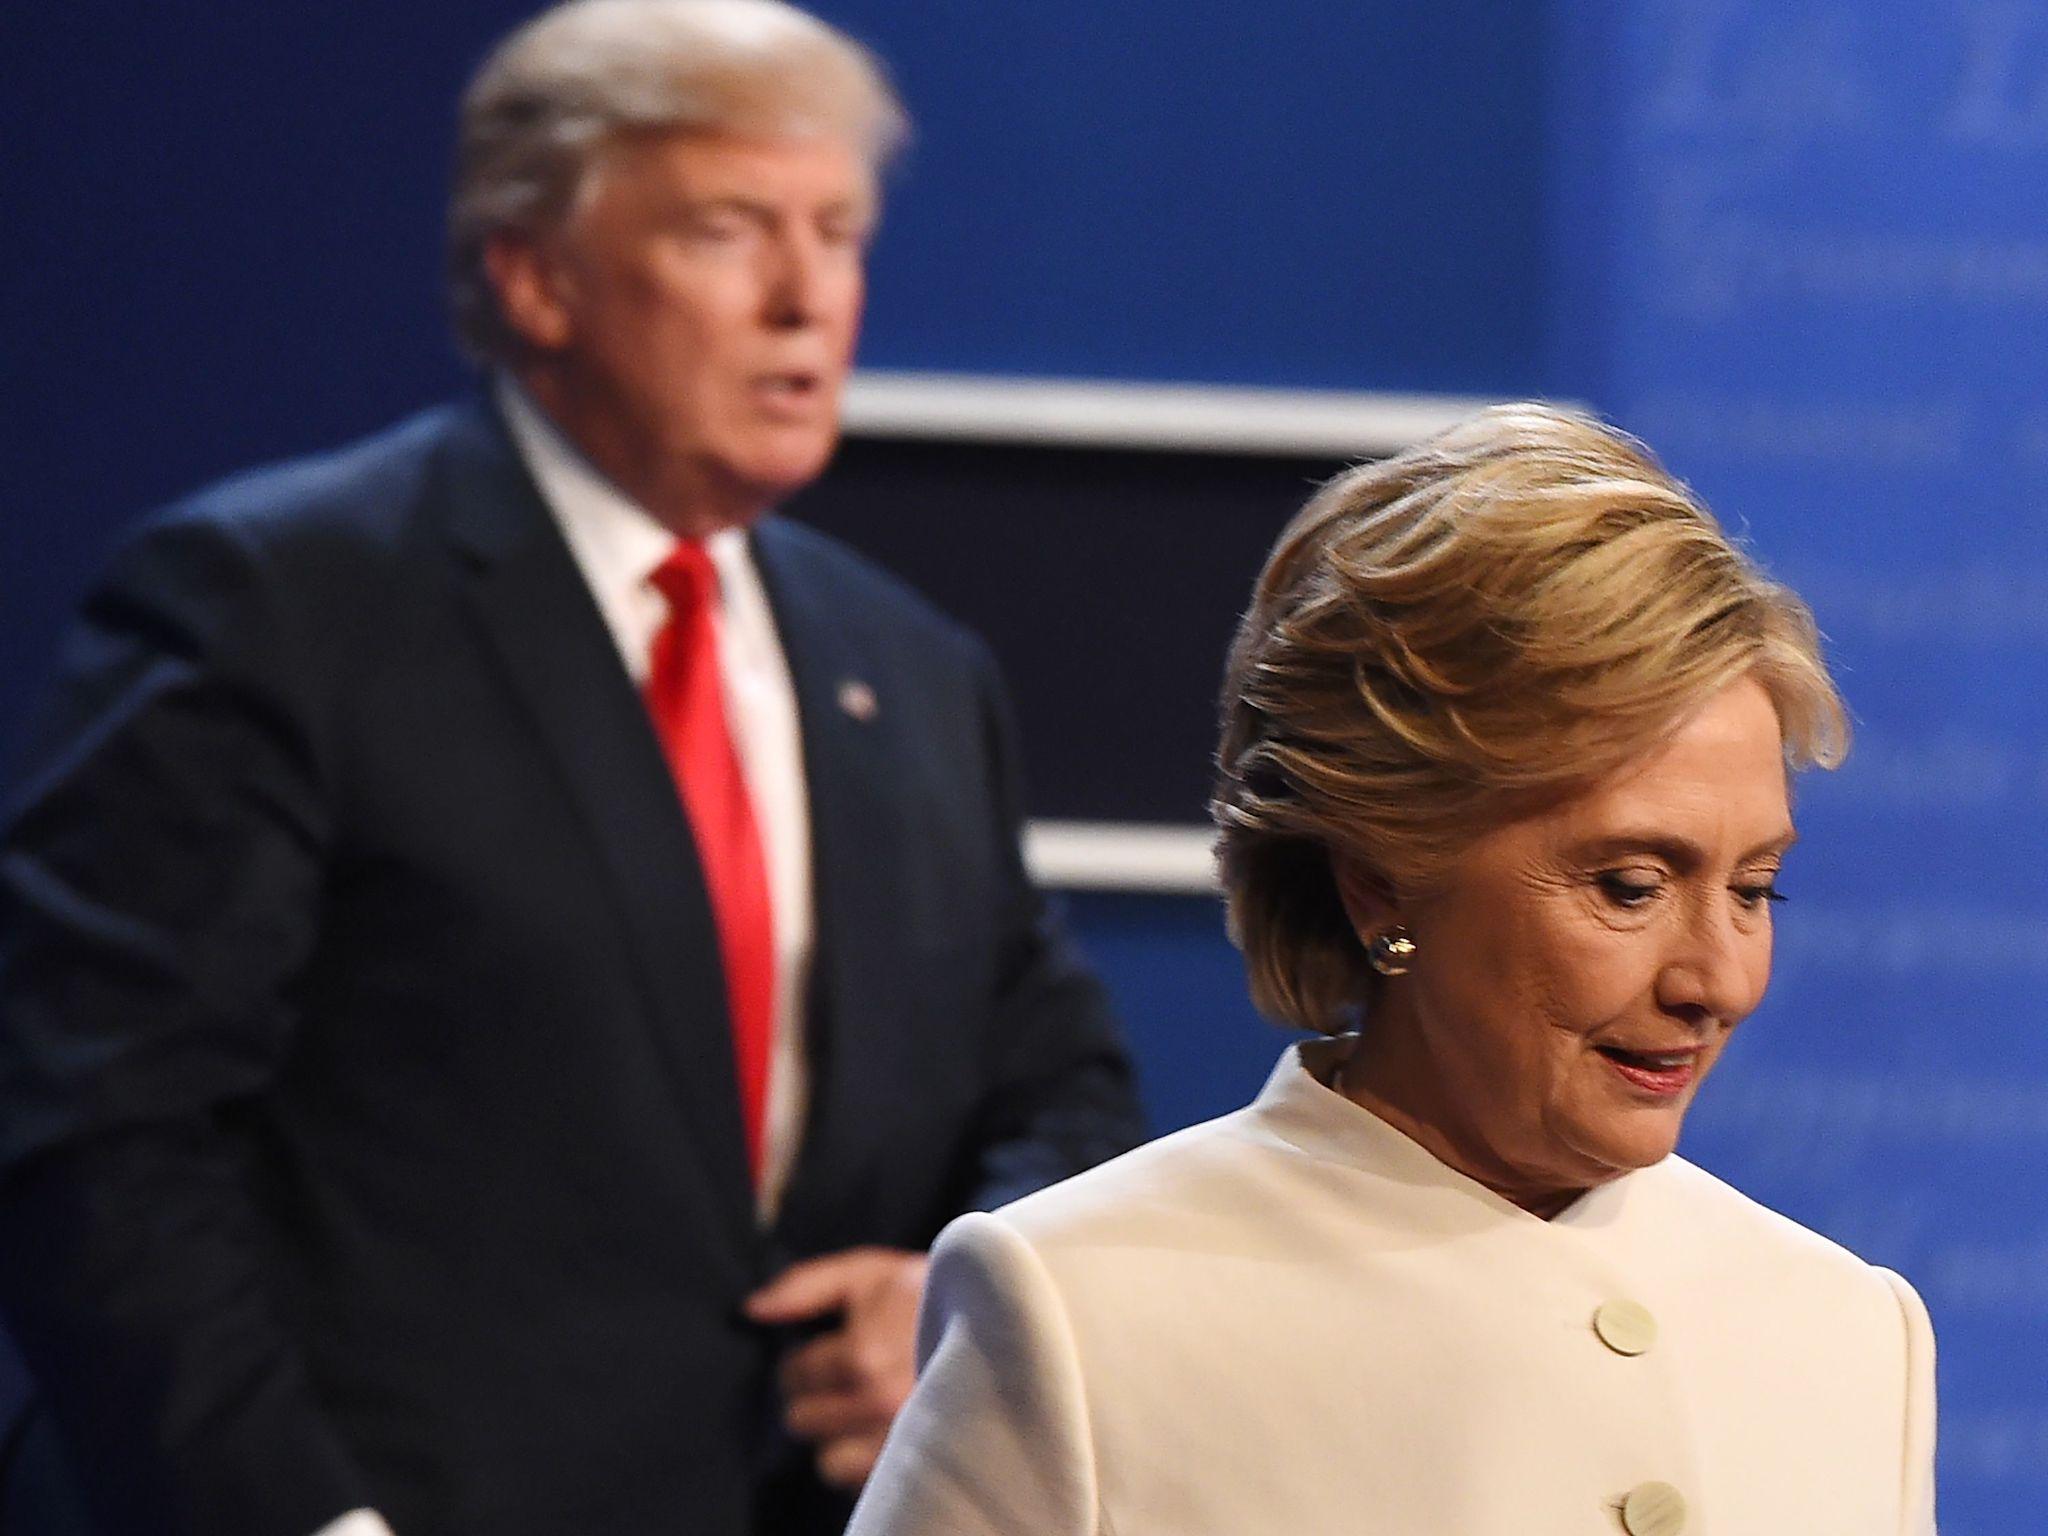 Democratic nominee Hillary Clinton and Republican nominee Donald Trump walk off the stage after the final presidential debate on 19 October